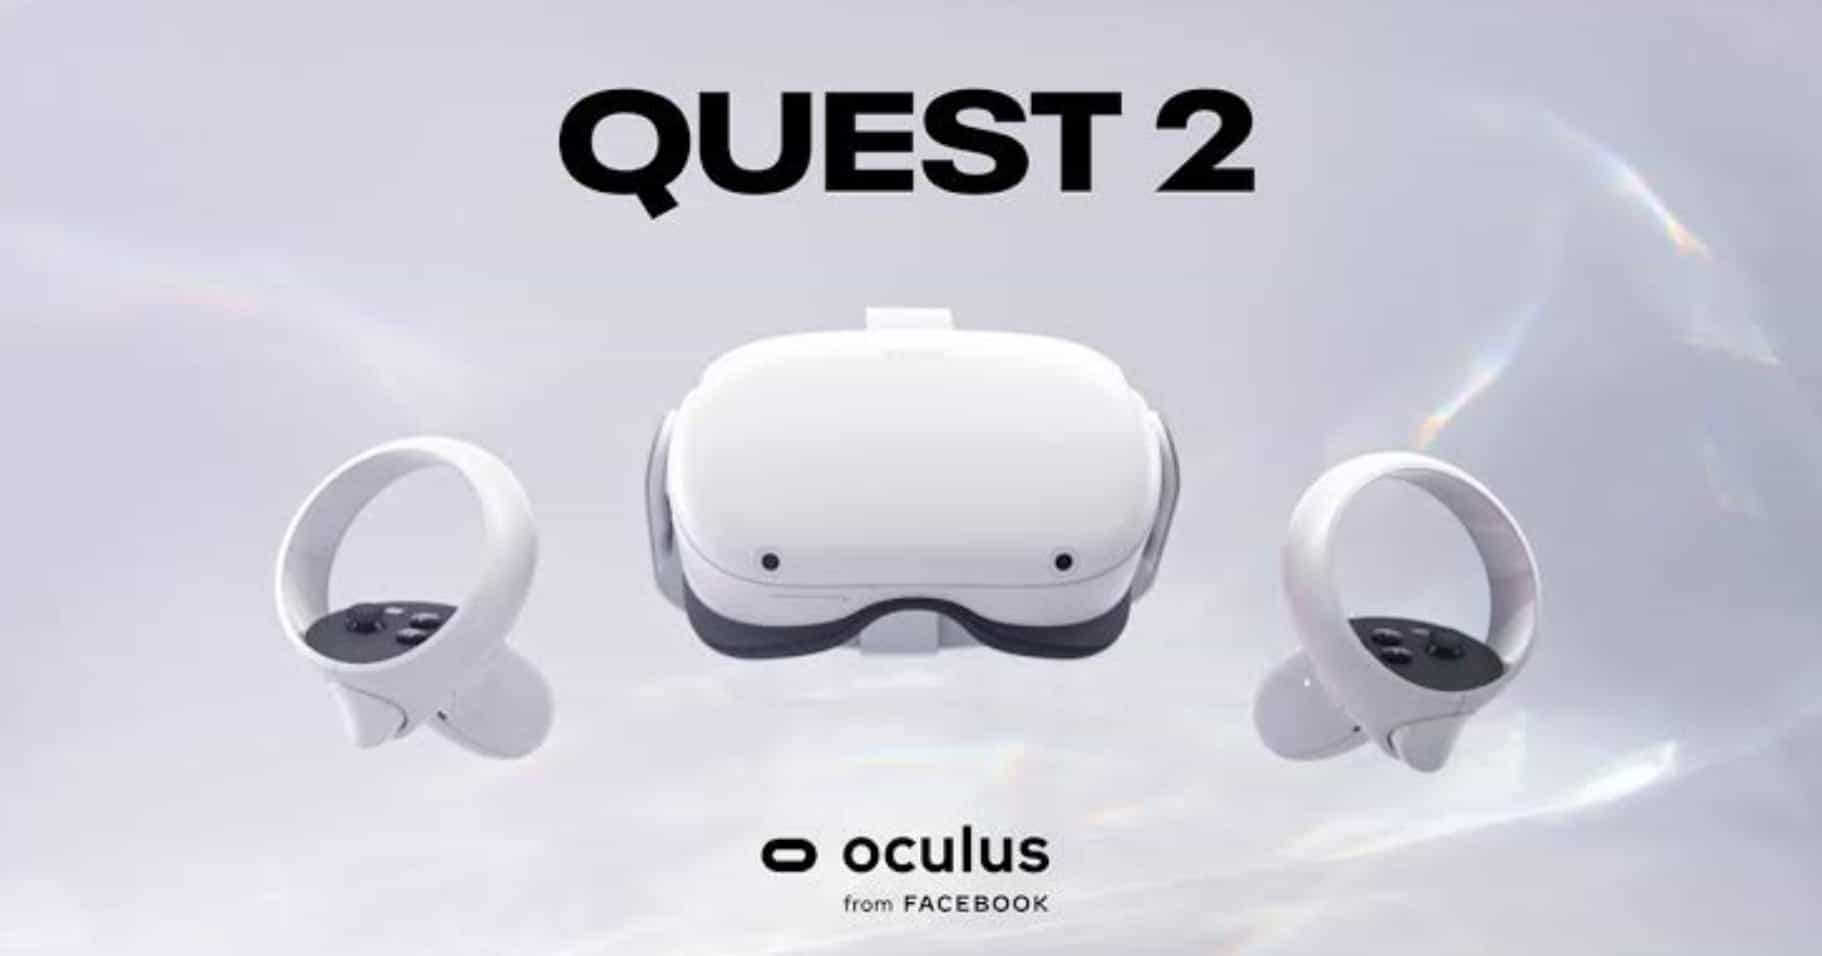 Oculus Quest 2 Update to Bring Wireless PC Streaming, 120Hz Mode, and More